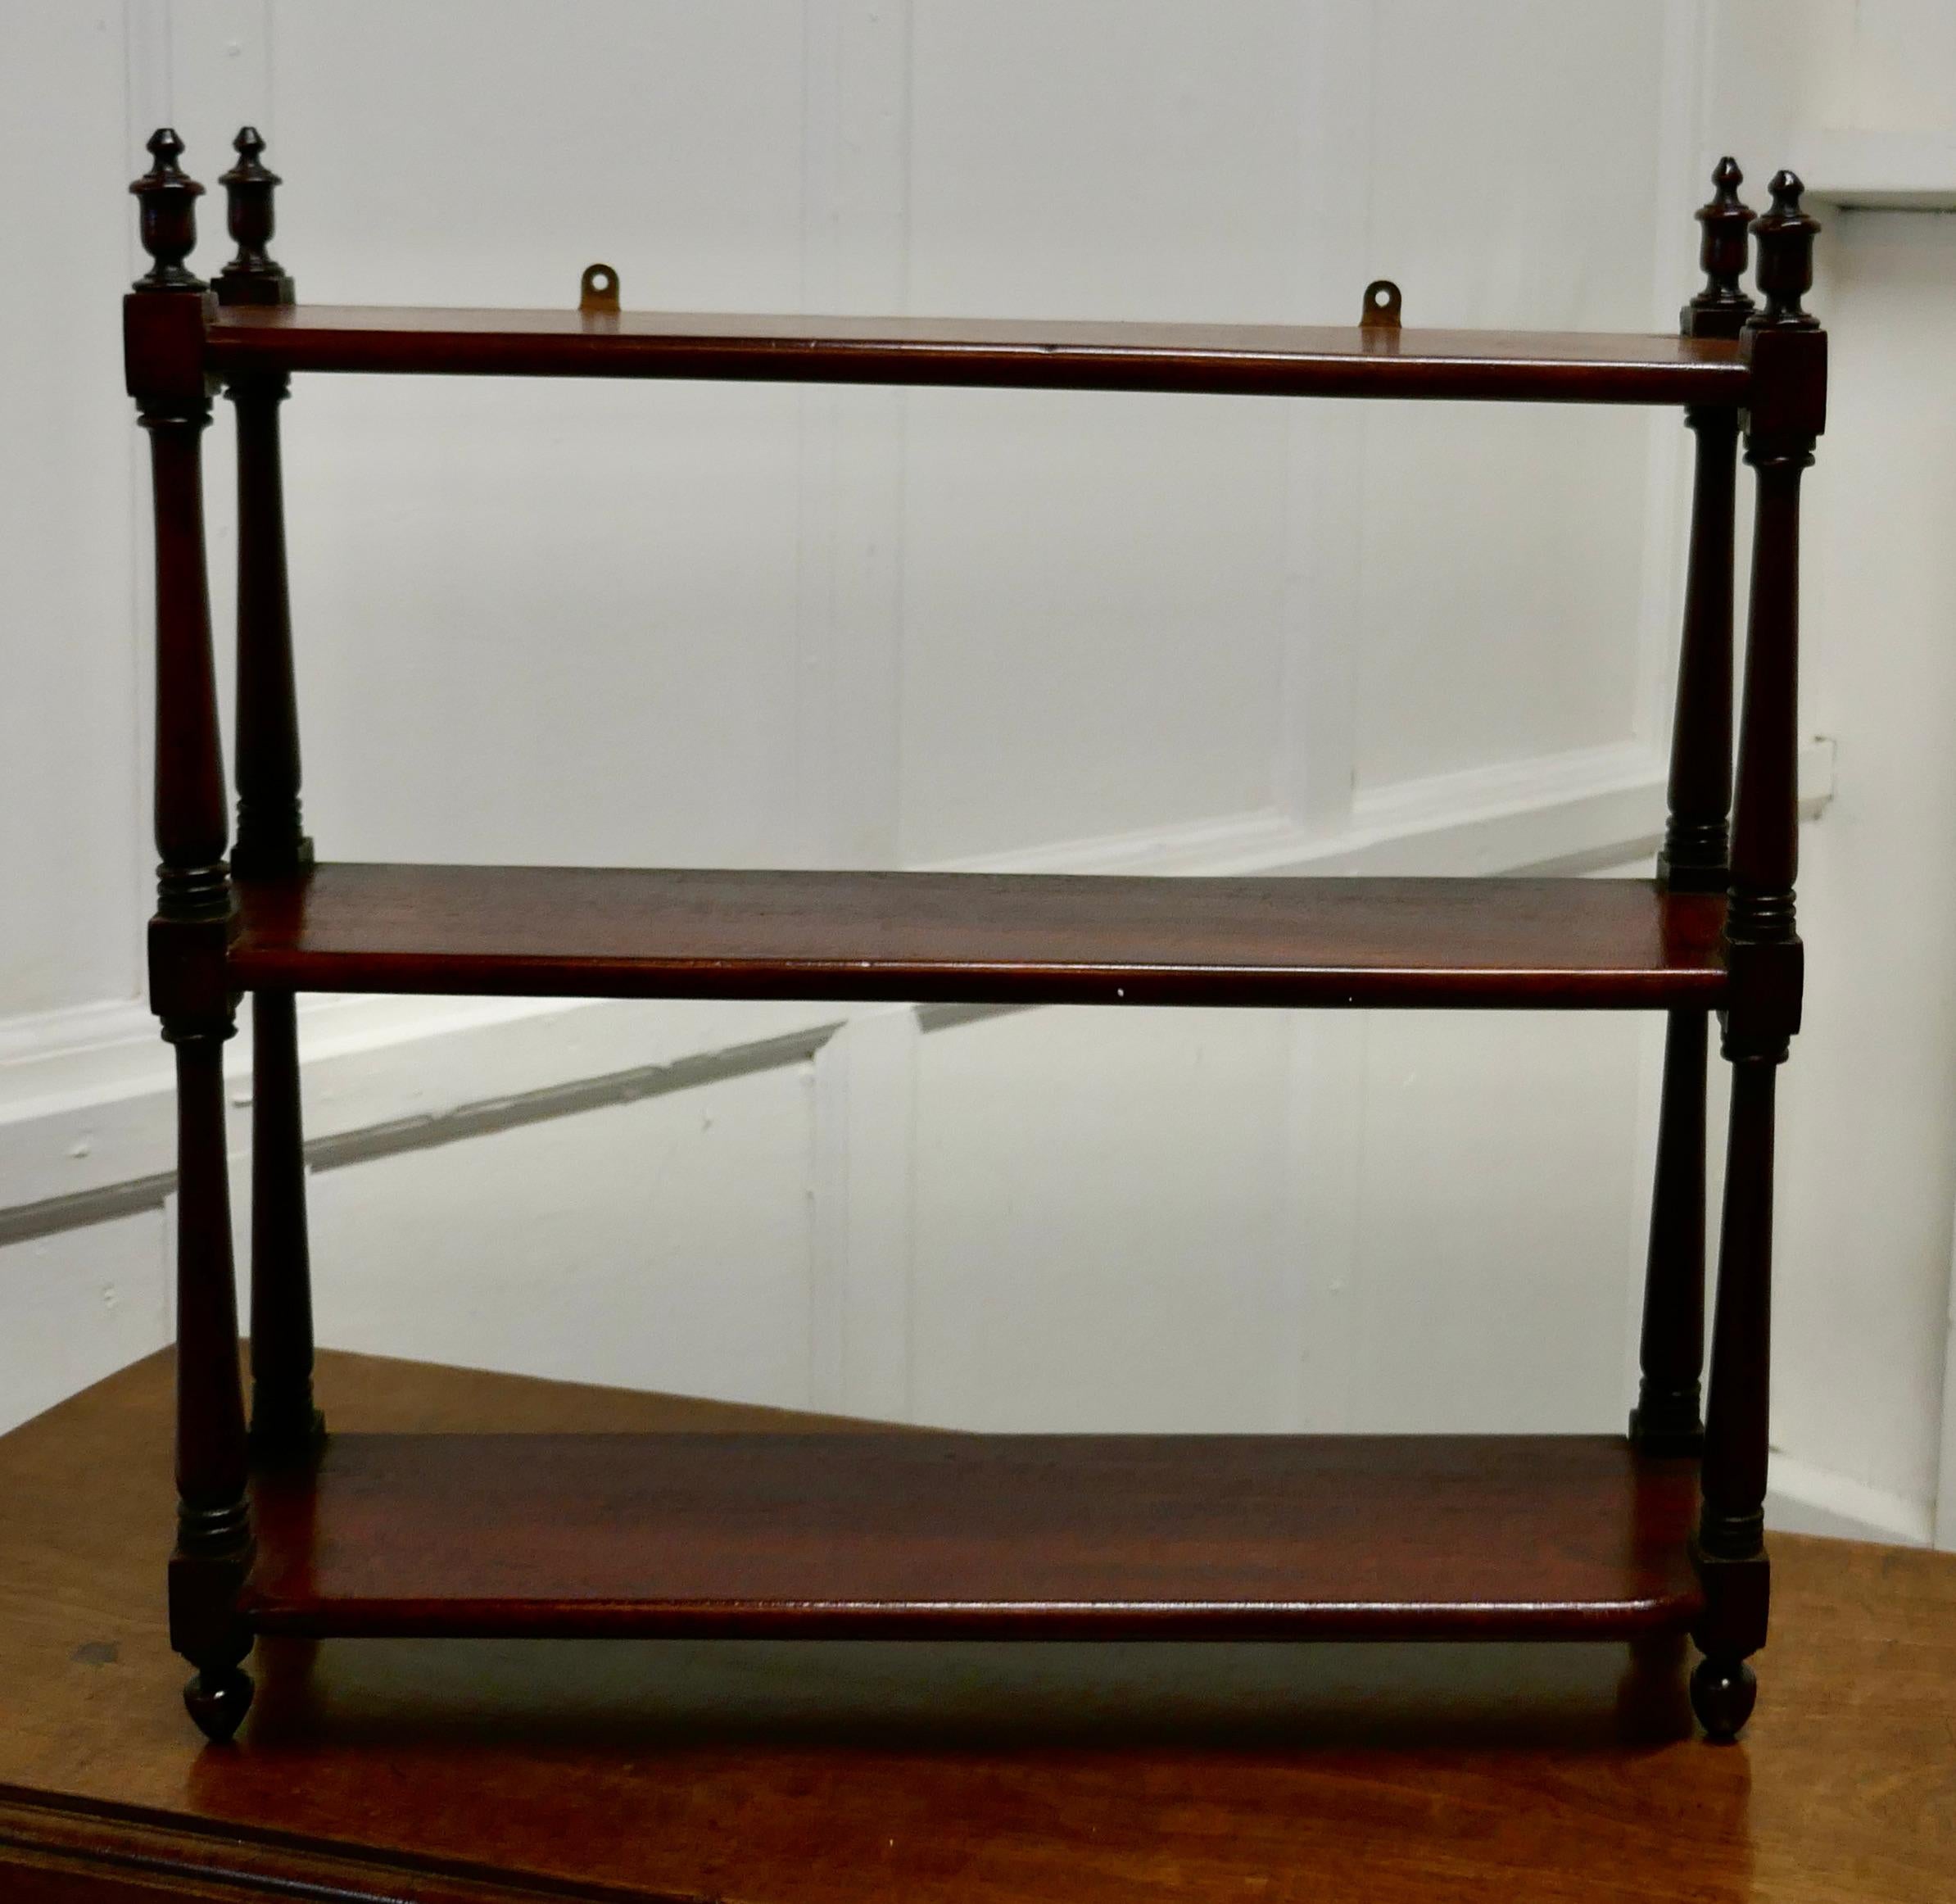 Mahogany wall hanging etagere

This charming little shelf unit, has 3 shelves, turned finials and feet
The shelf is in good condition and would work well in the Bathroom Kitchen or Bedroom 
The Shelf is 5.5” deep, 20” long and 20” high
TGB608.